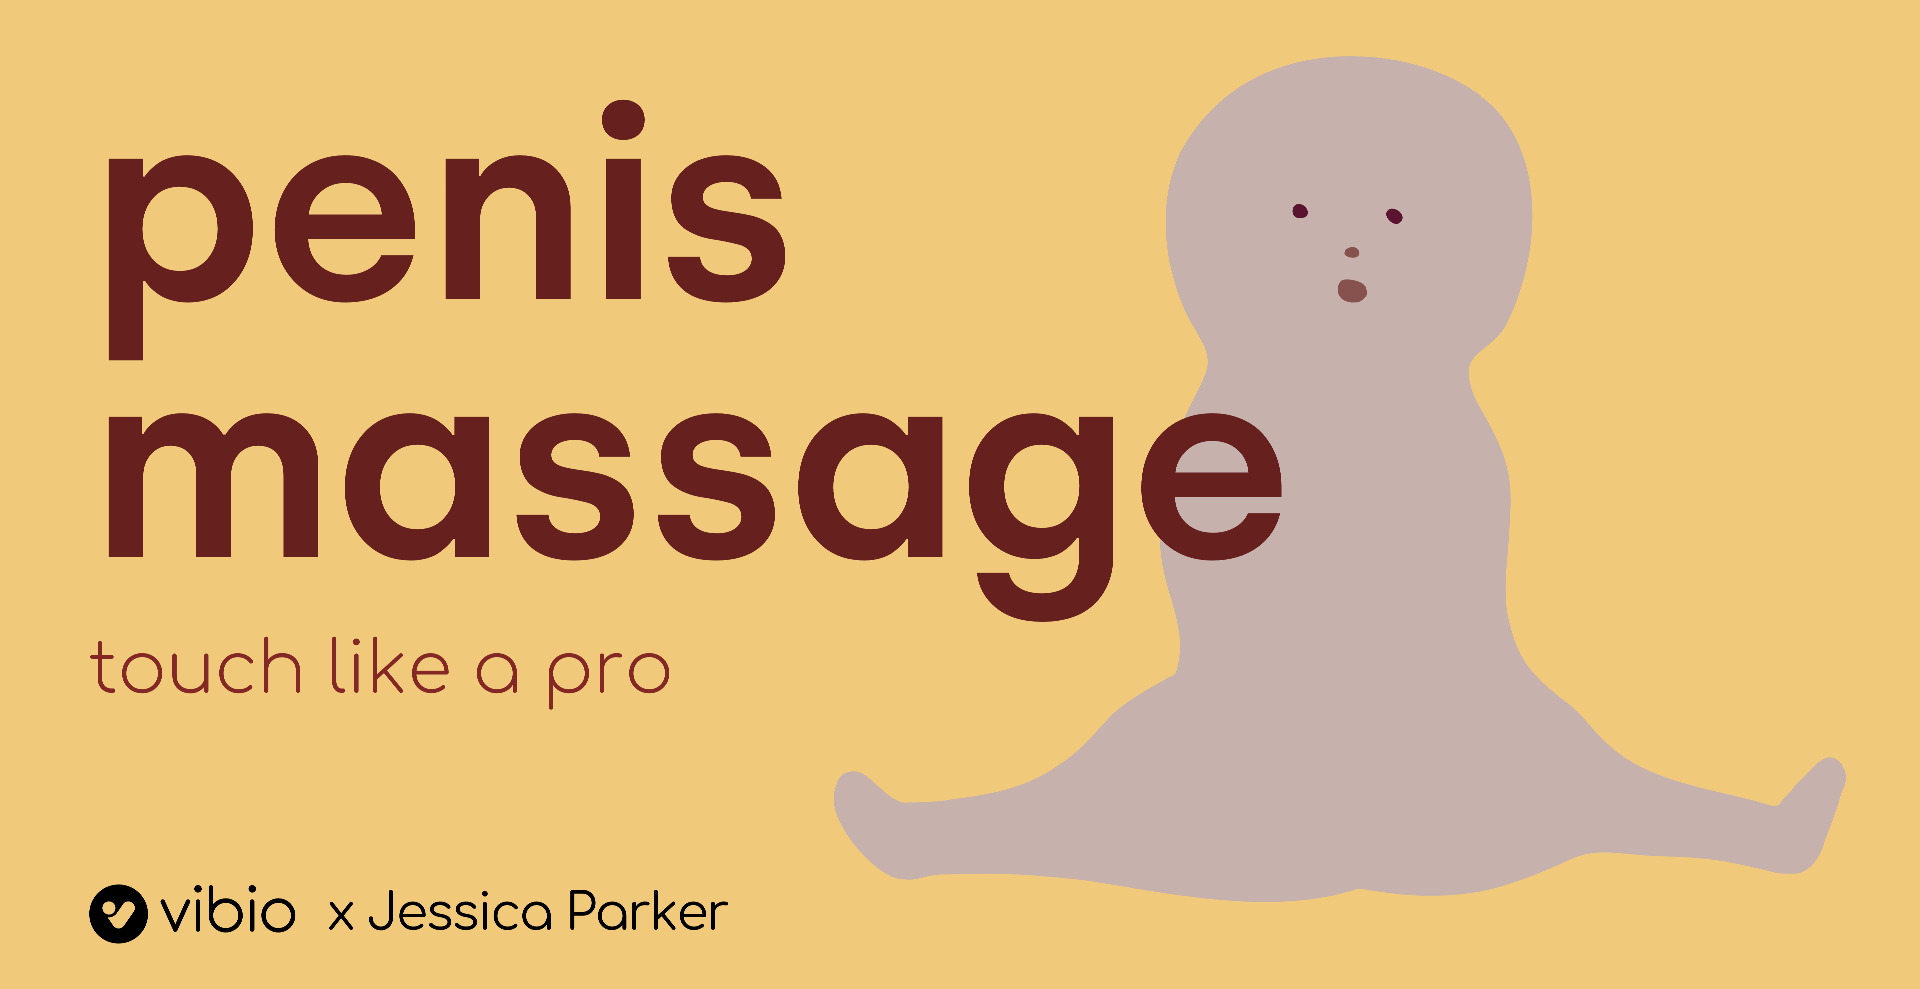 alison marion hands recommends where can i get a penis massage pic